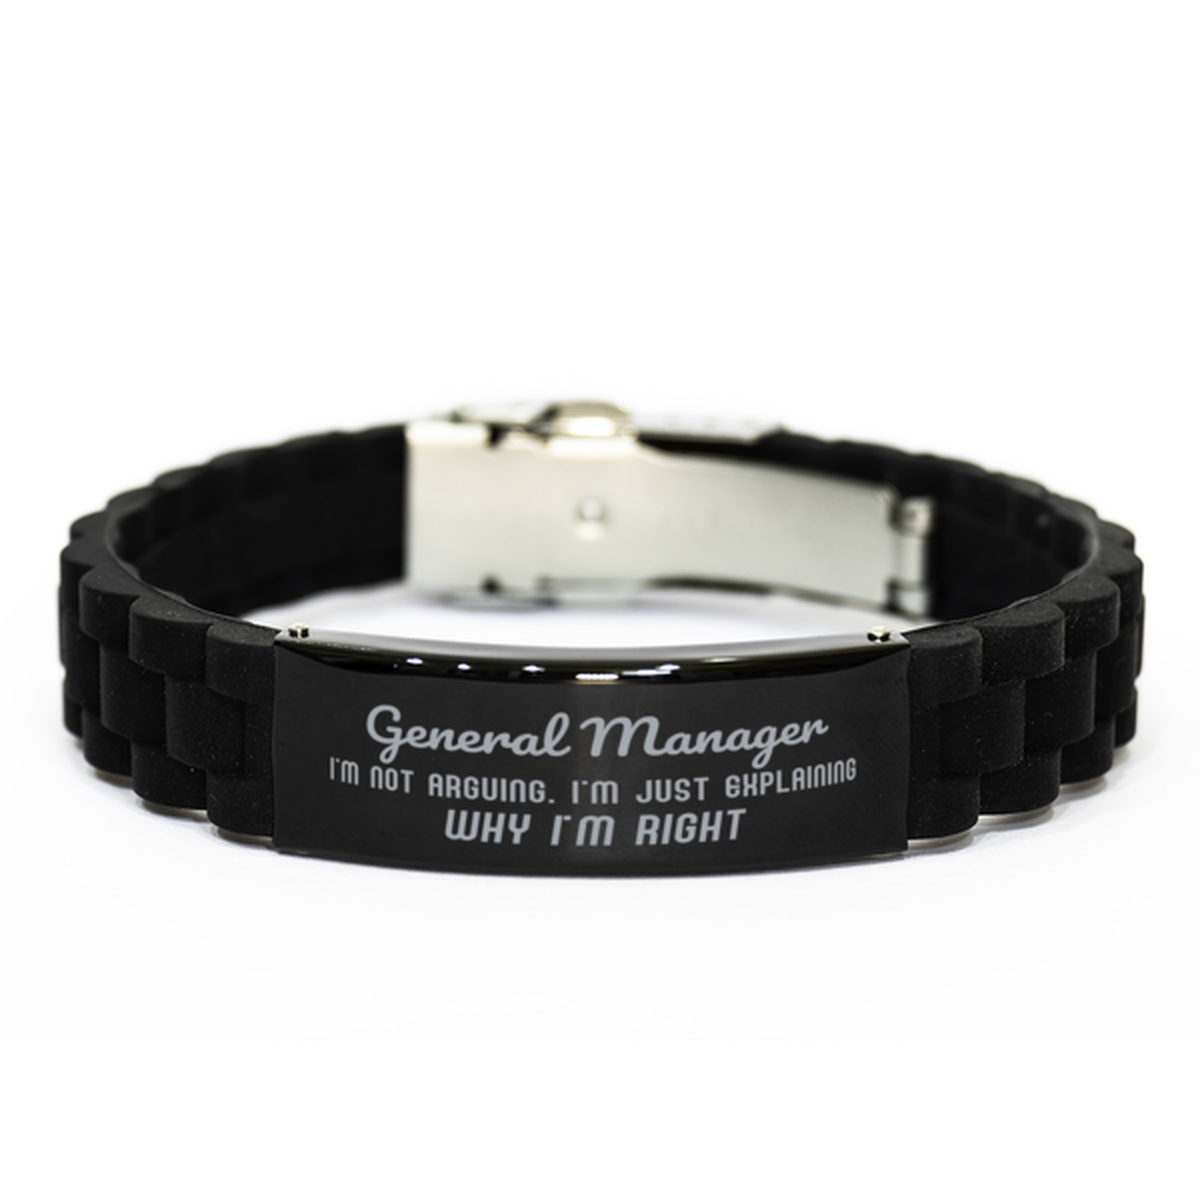 General Manager I'm not Arguing. I'm Just Explaining Why I'm RIGHT Black Glidelock Clasp Bracelet, Funny Saying Quote General Manager Gifts For General Manager Graduation Birthday Christmas Gifts for Men Women Coworker